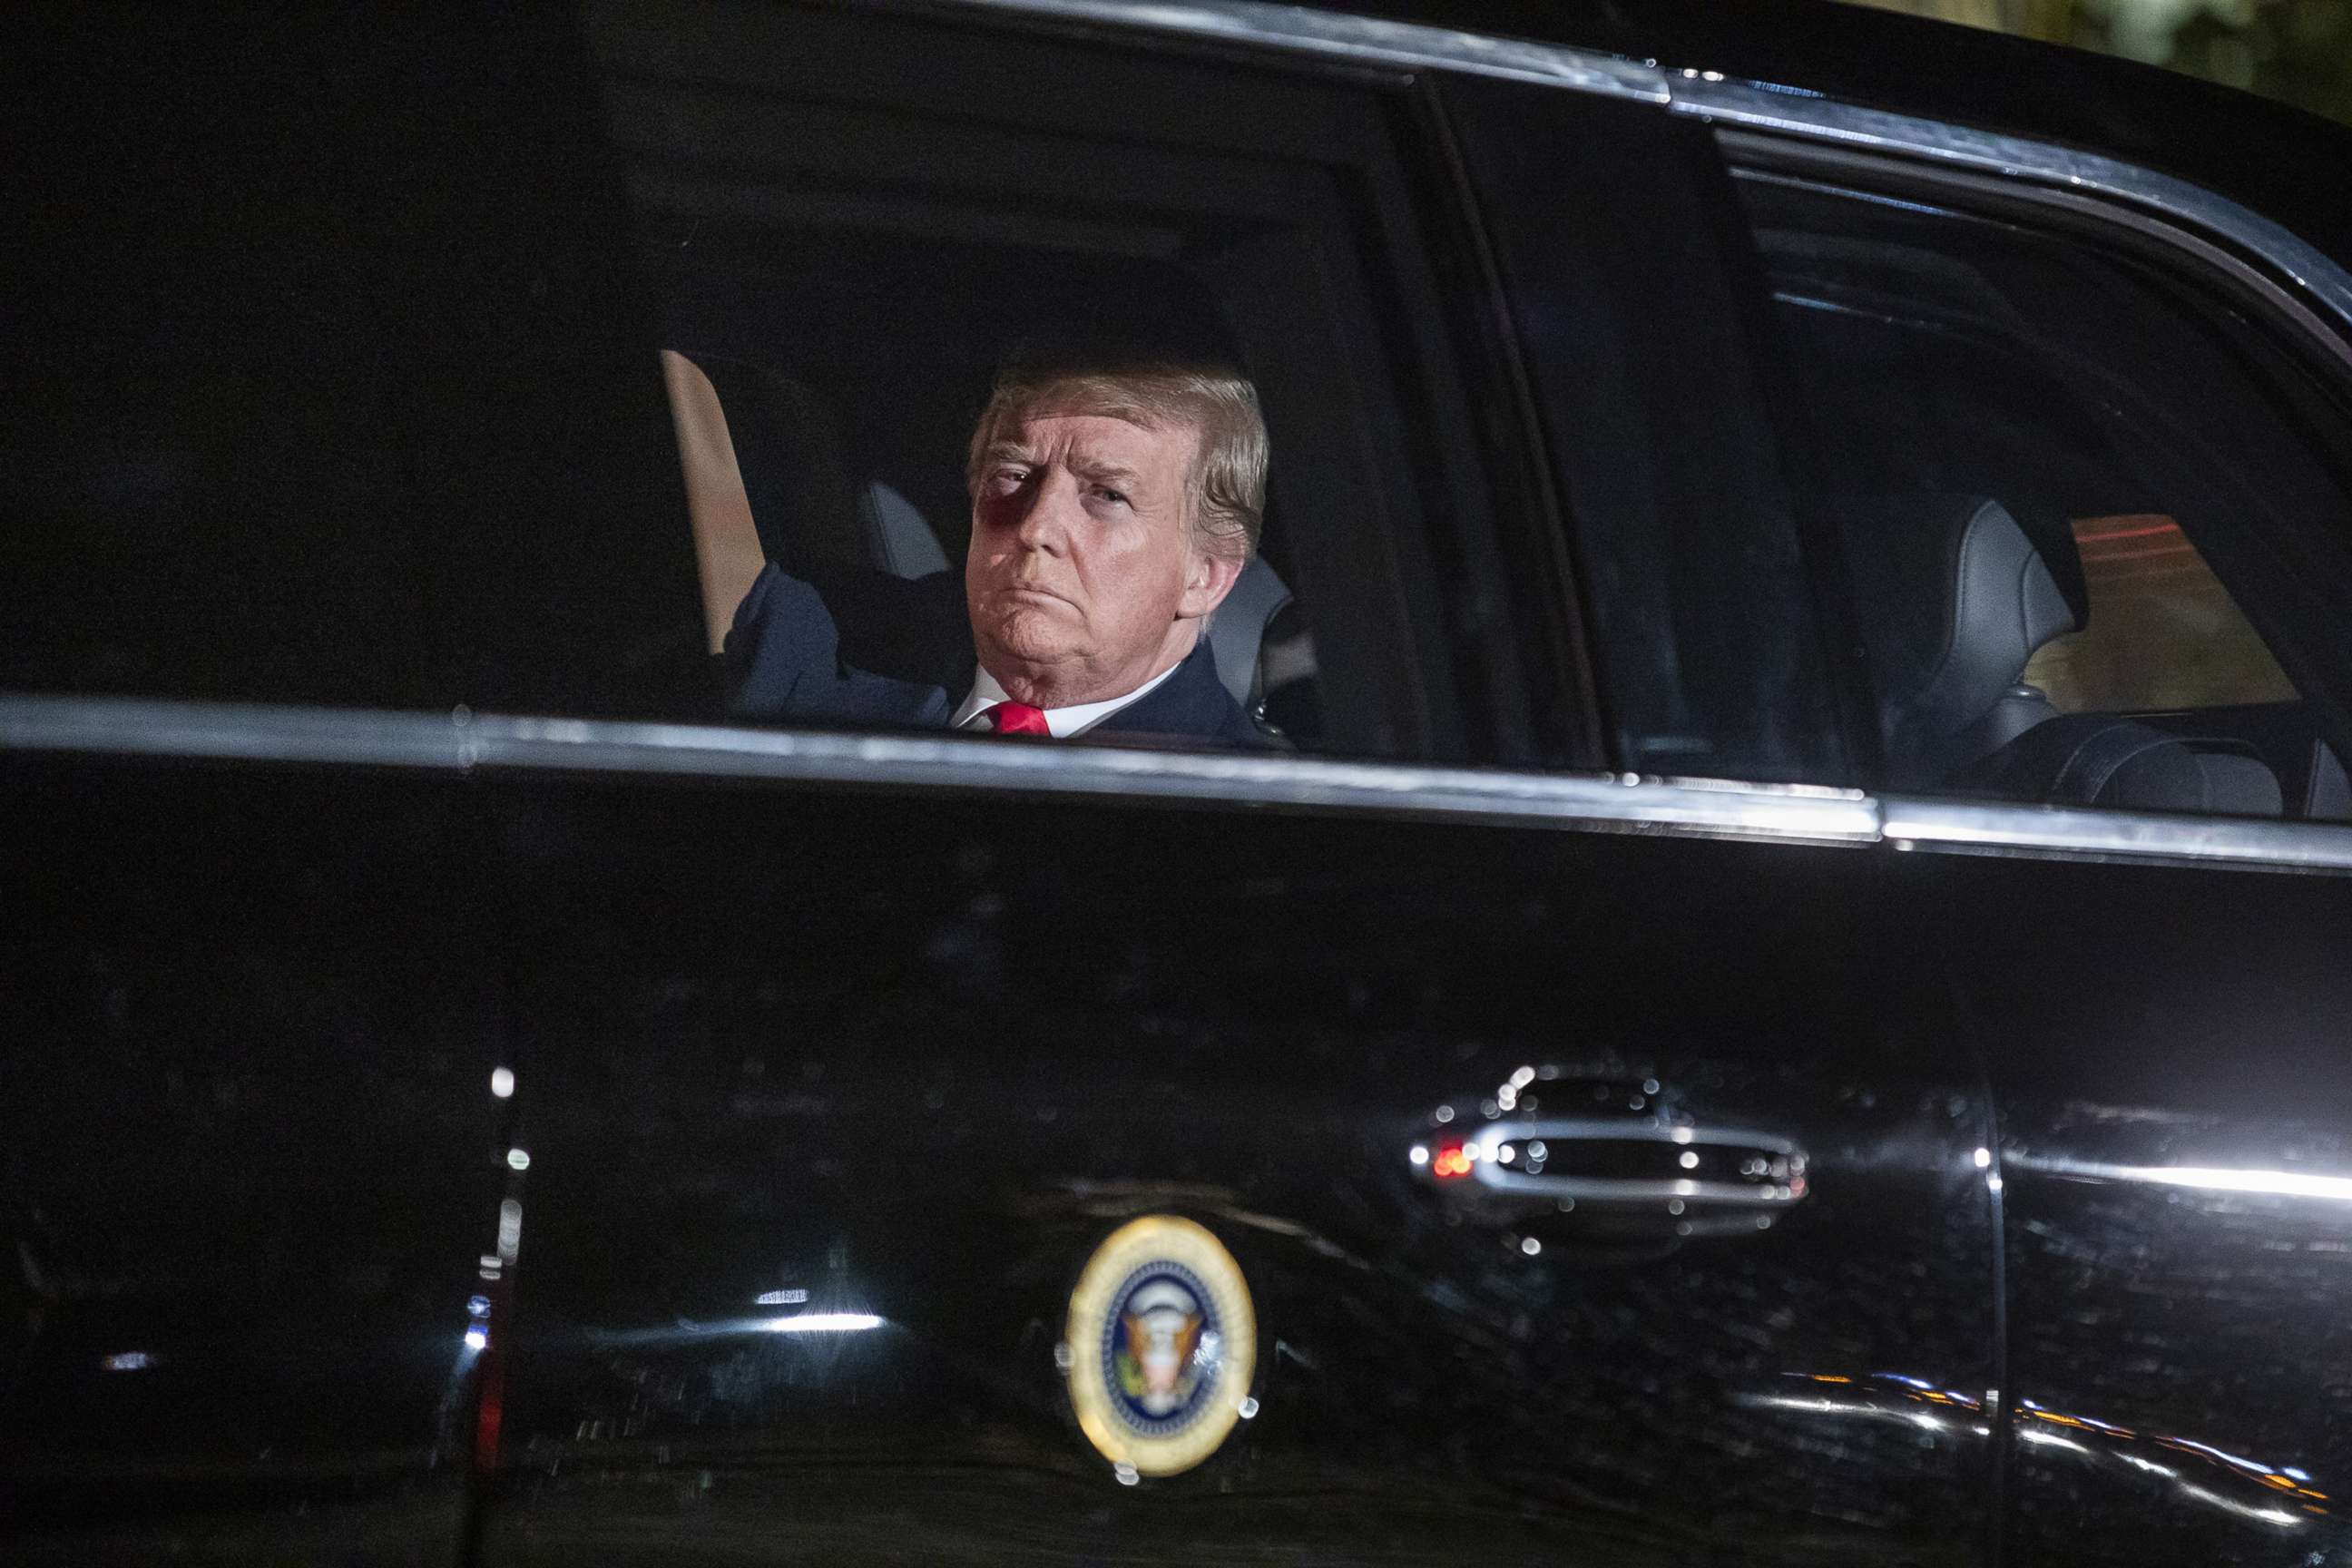 PHOTO: President Donald Trump rides in the presidential limo as he departs the White House, Feb. 5, 2019, in Washington, D.C.